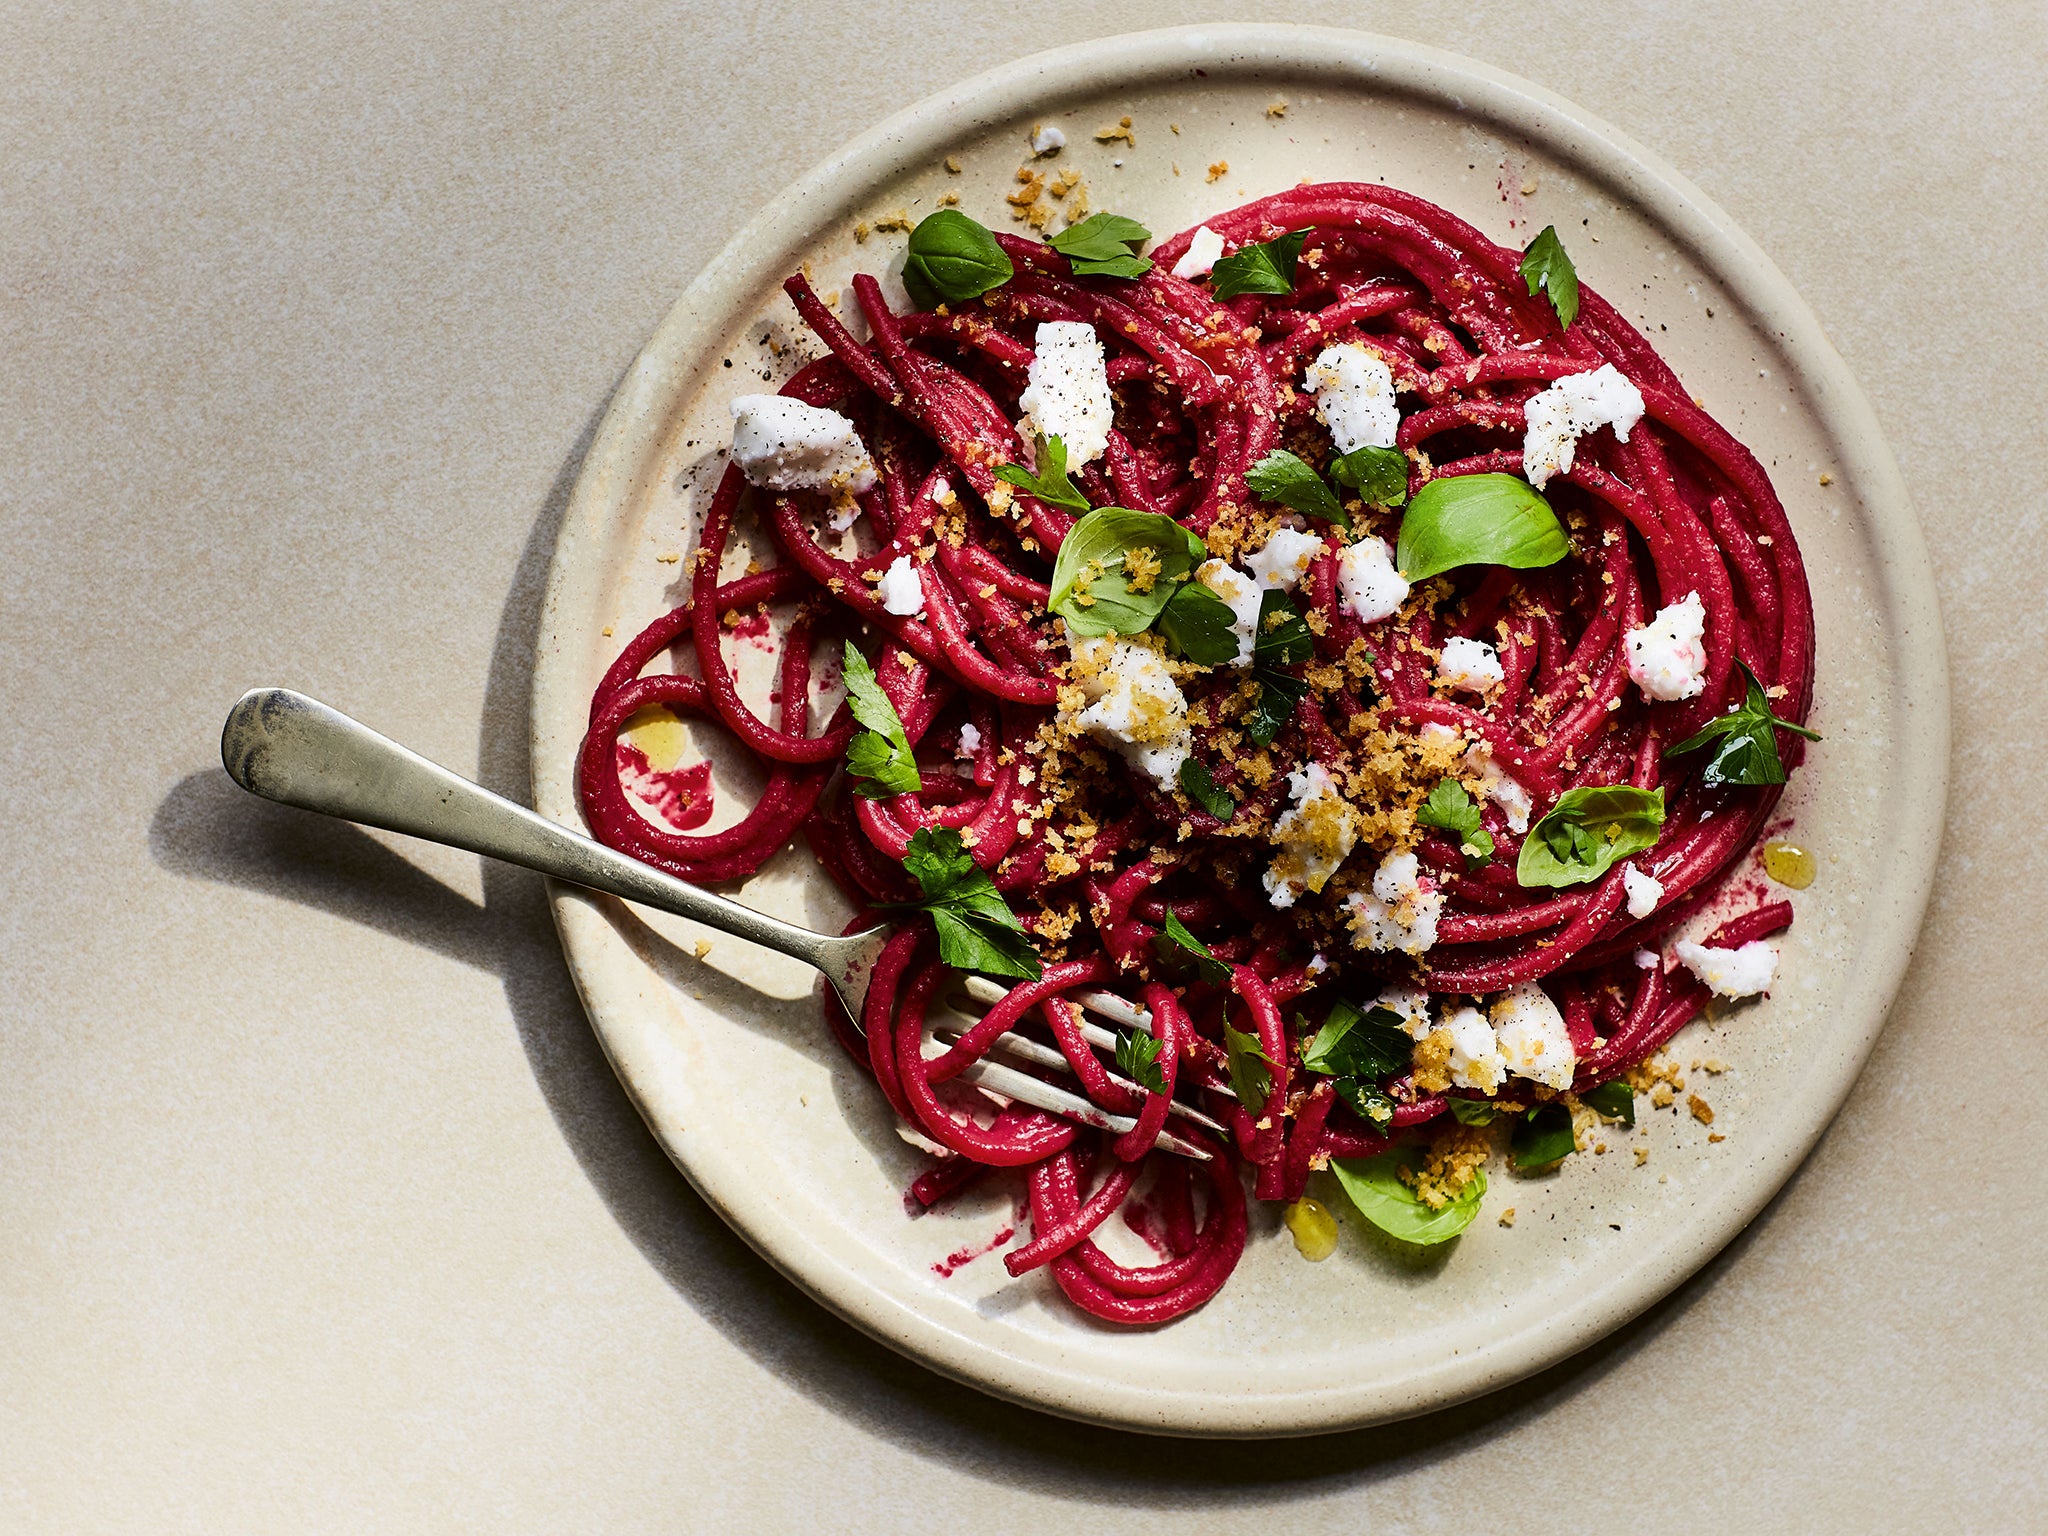 The beetroot turns the pasta a majestic ruby red